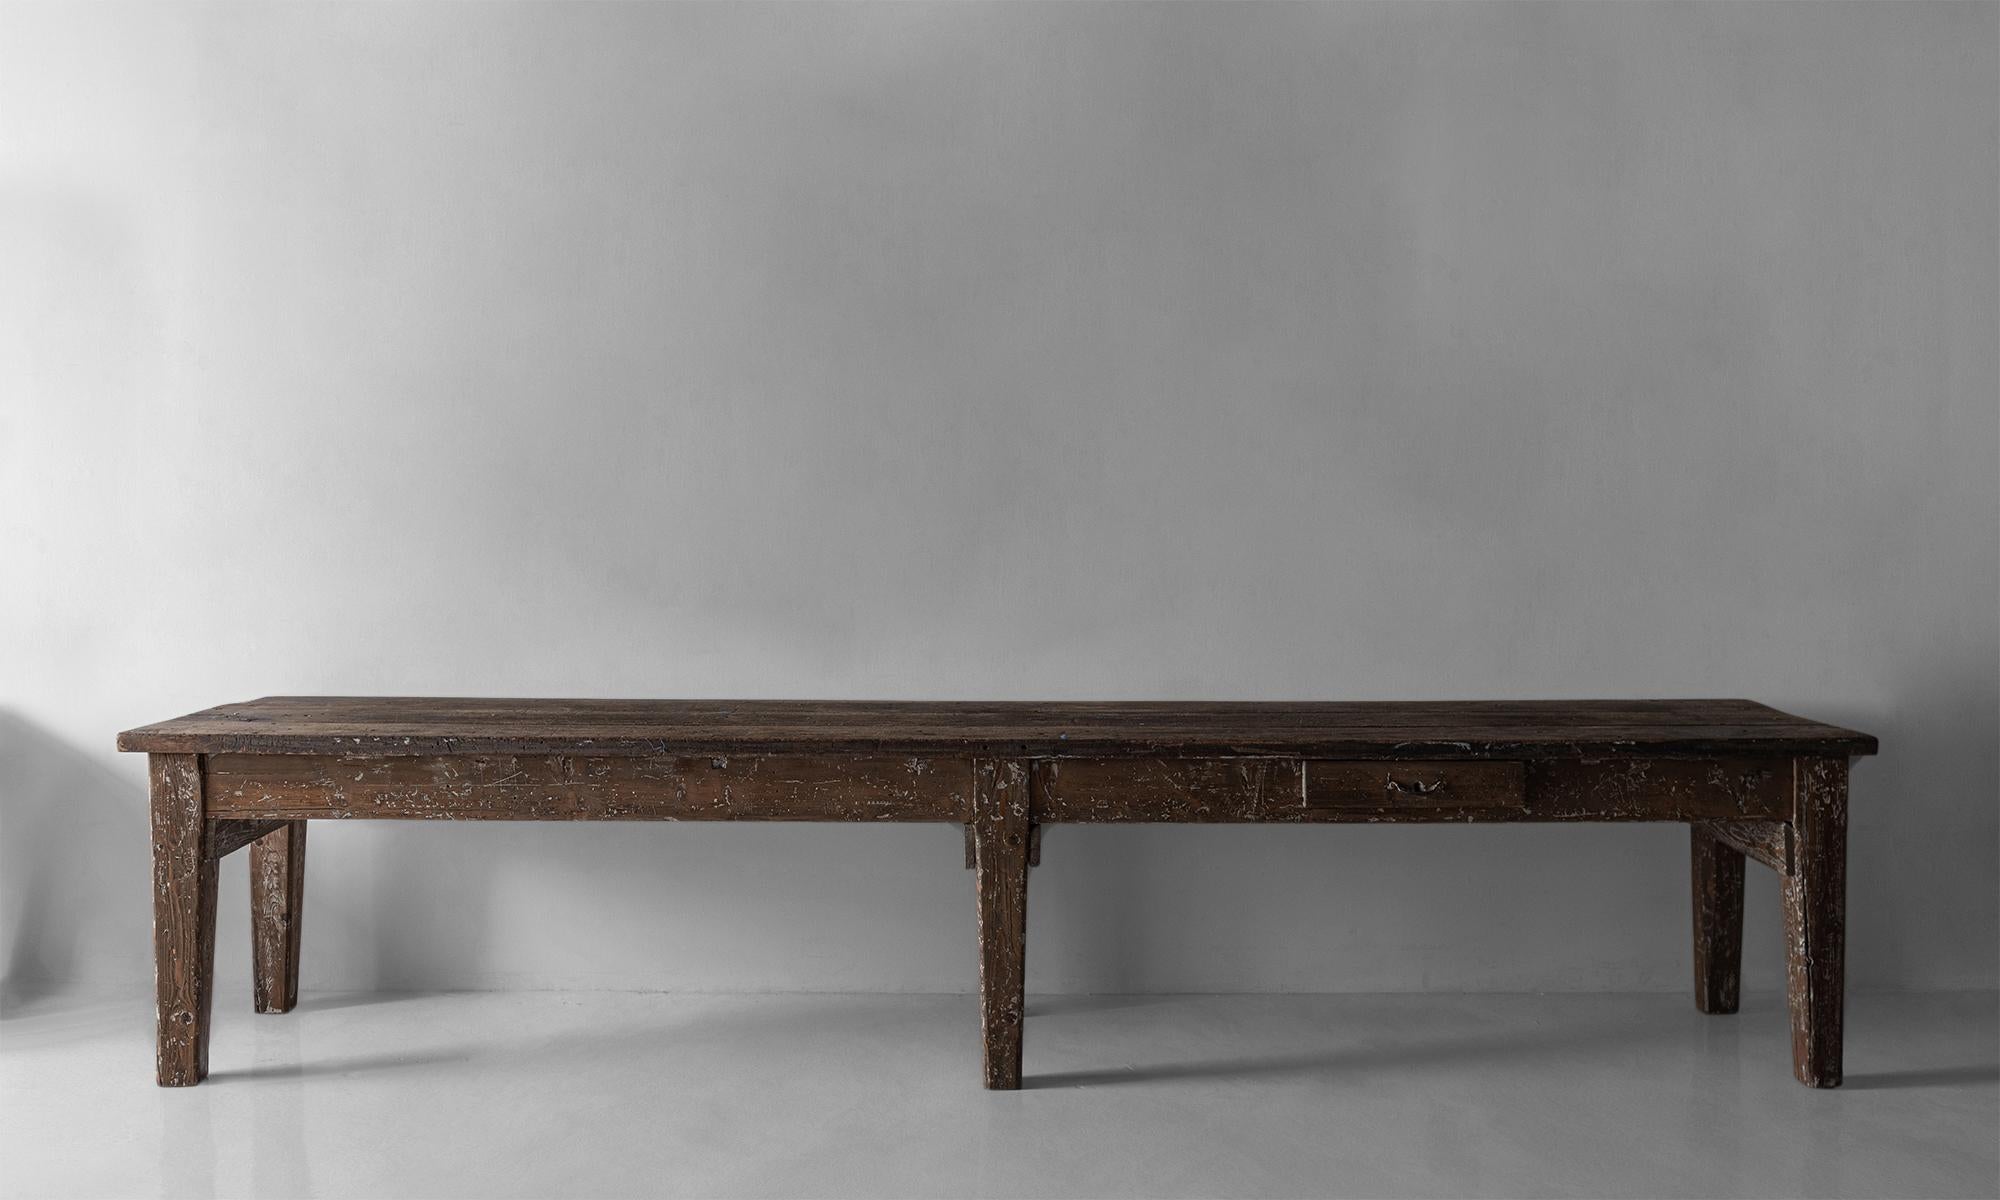 Wood Rustic Dining Table, Italy, 19th Century